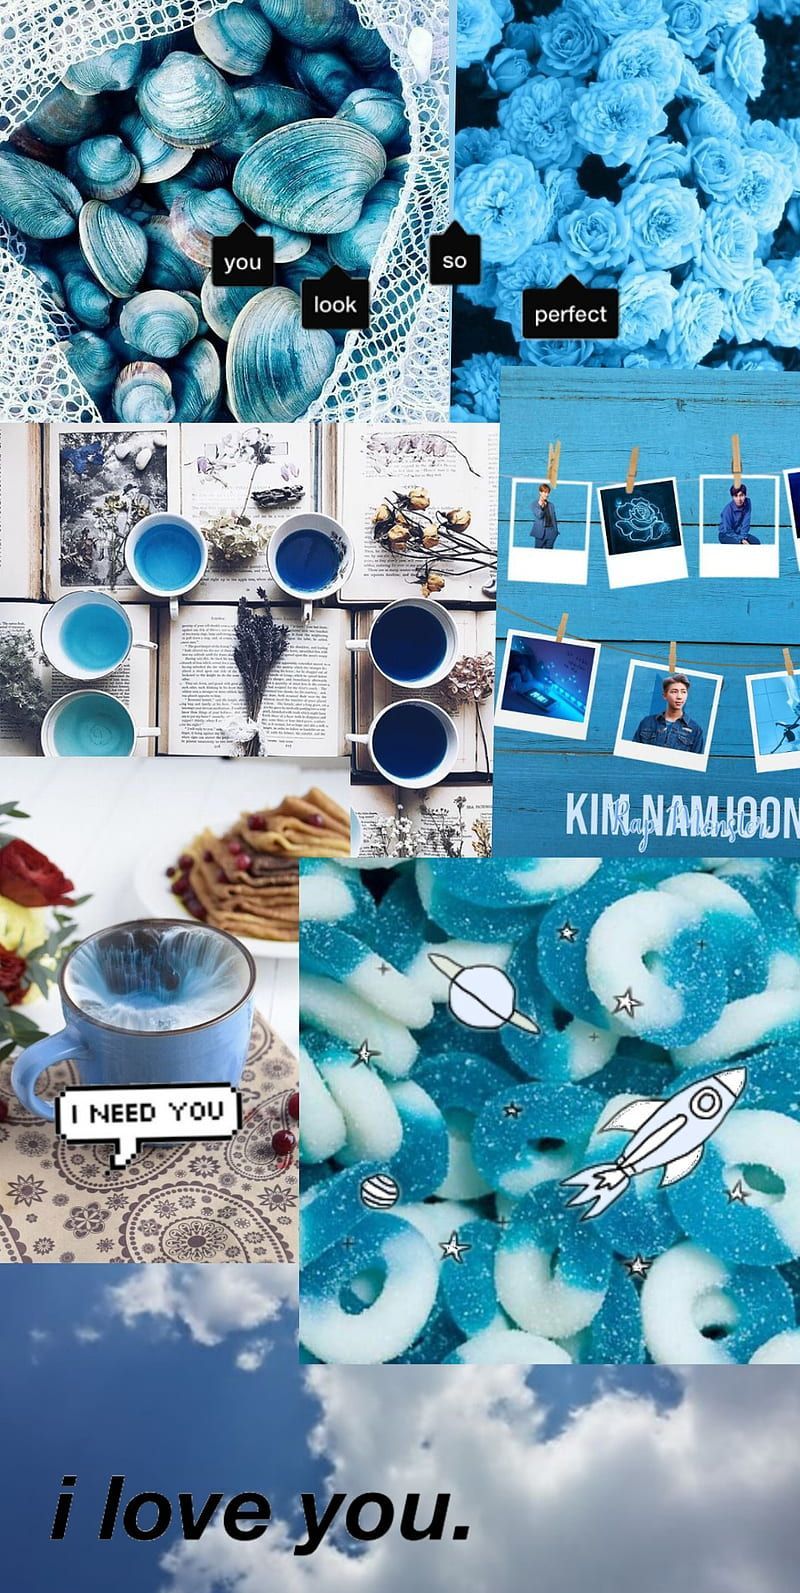 Blue aesthetic wallpaper, polaroids of kim namjoon, seashells and roses, blue food and cup, i love you note - Dark blue, navy blue